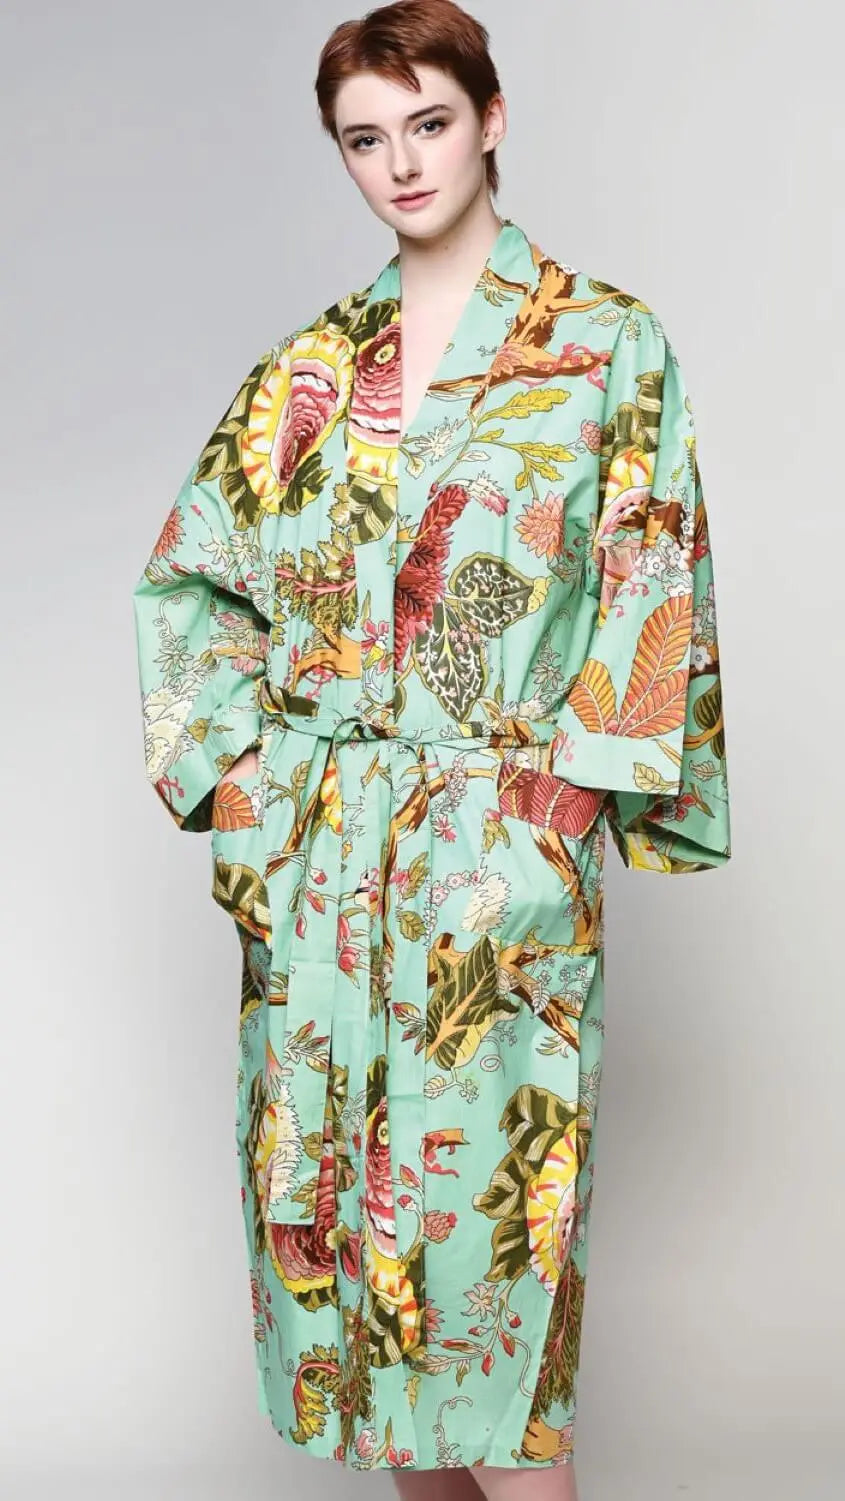 Cotton Long Kimono Robe in Seafoam Green Floral with Long Sleeves and Pockets